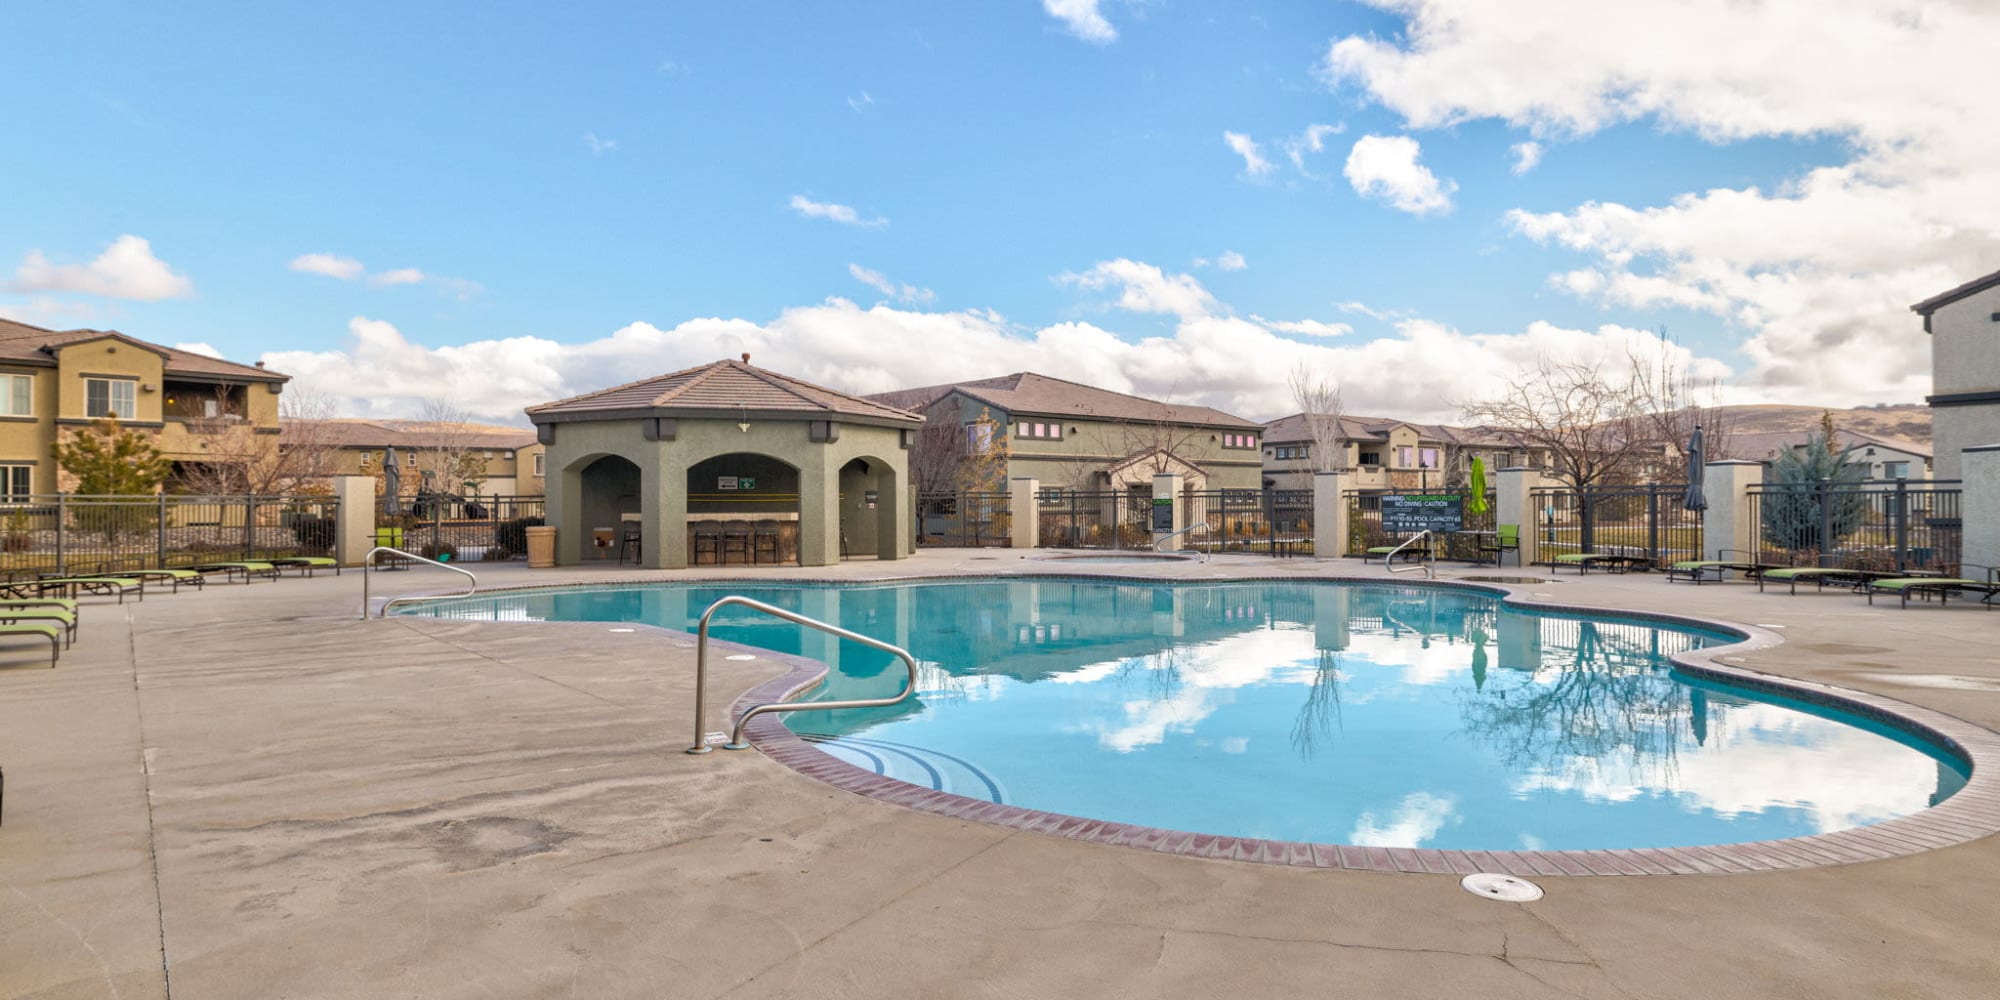 Swimming pool at The Trails at Pioneer Meadows in Sparks, Nevada